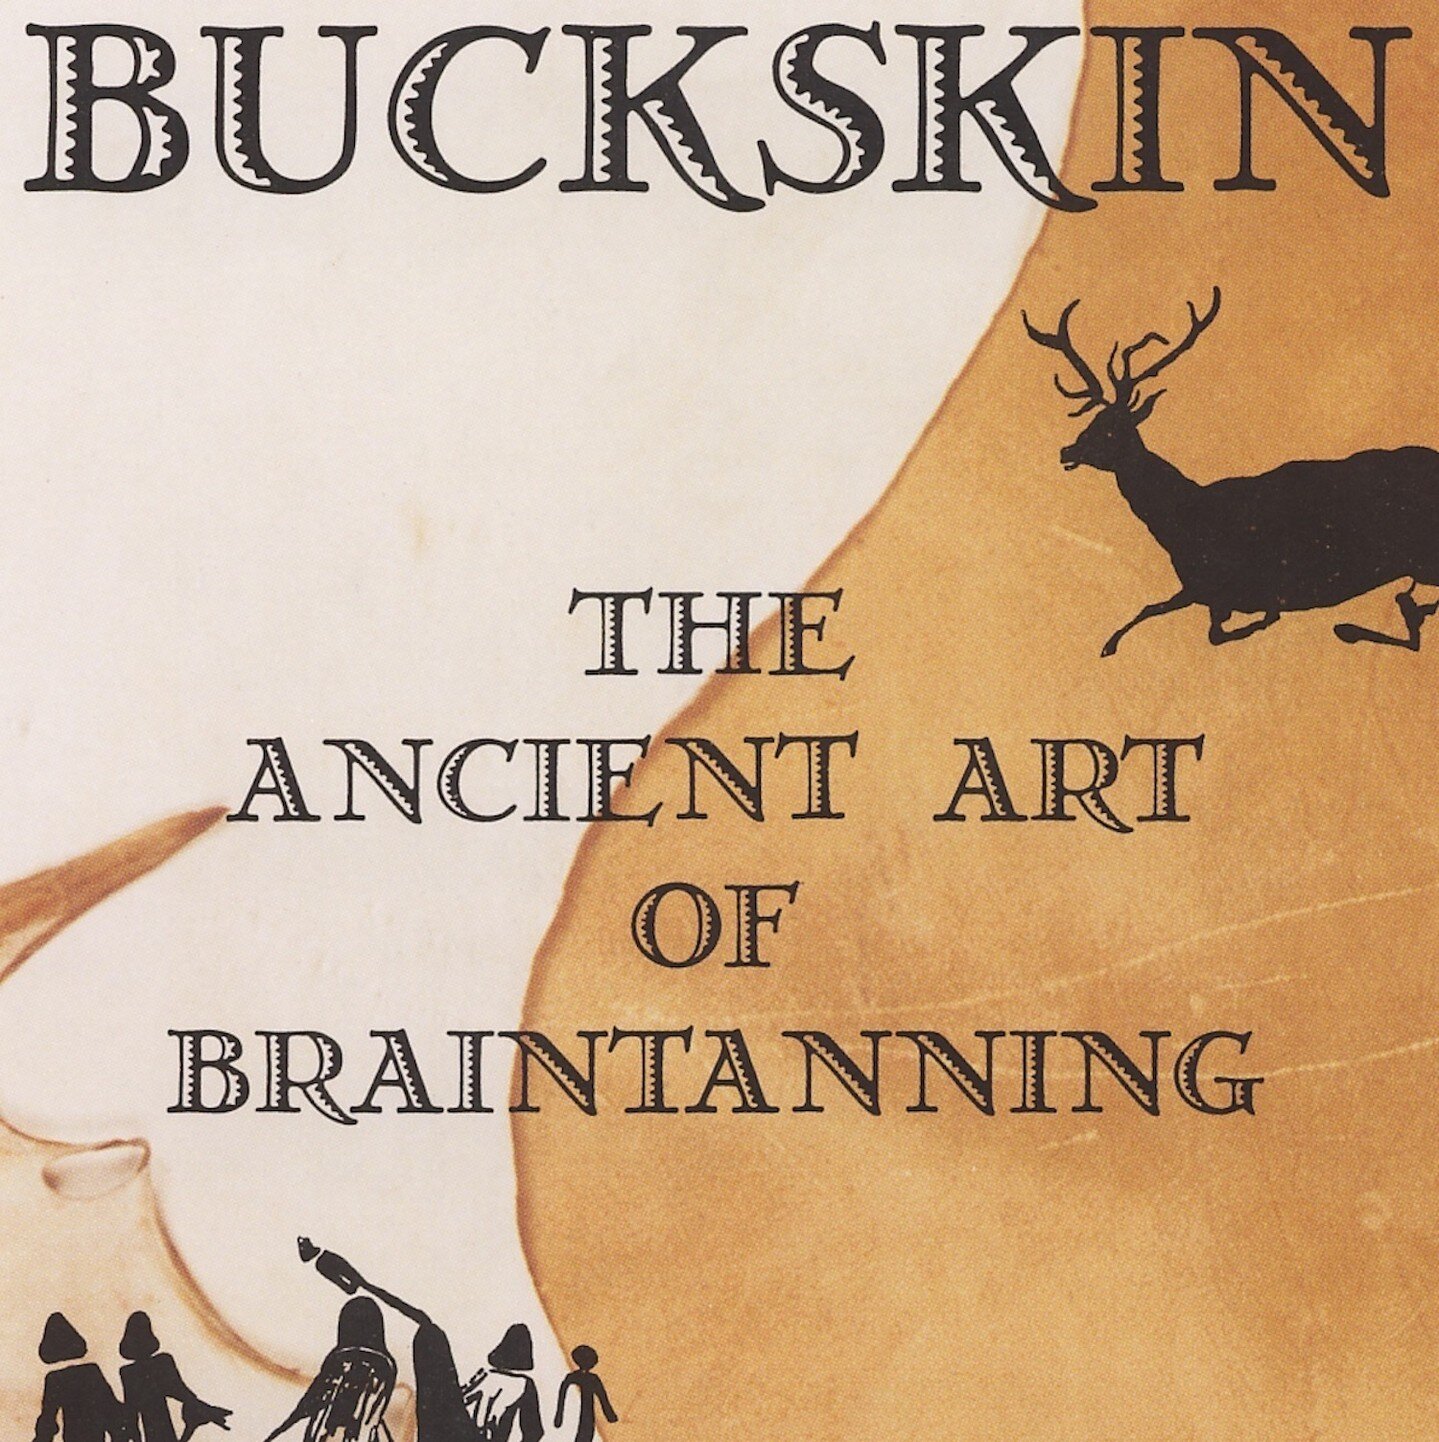 Buckskin Book Reprint - January Update
After a really busy fall season during which I was unable to move the Buckskin Book Project forward, I have kept my 2023 work schedule through late March open in order to dedicate all available time to the proje